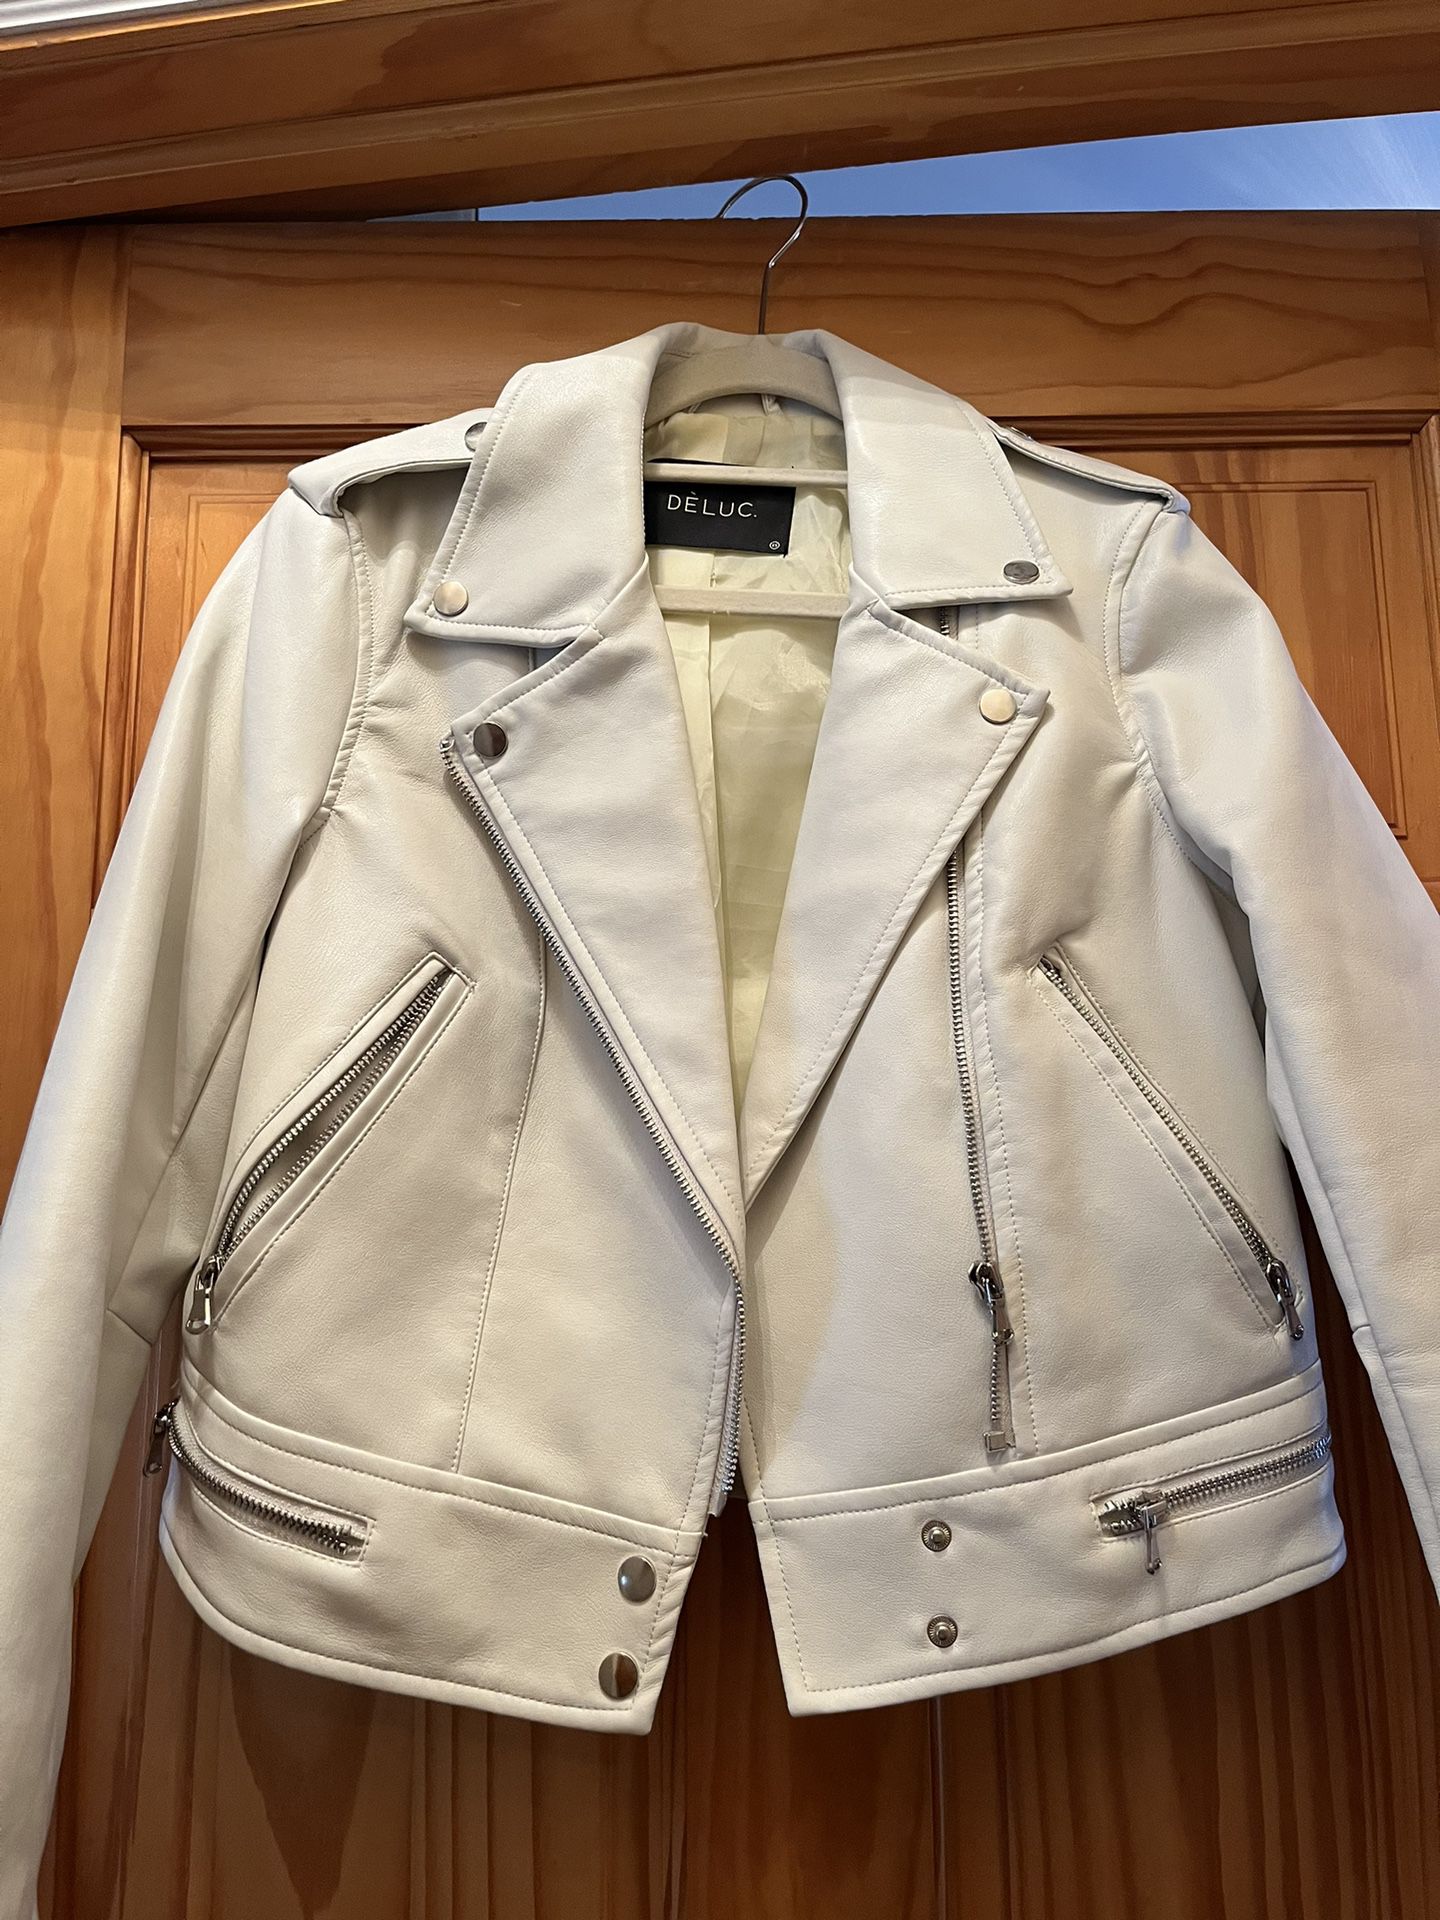 Cool leather jacket. Deluc Jacket. Off white. Size xs Never been worn, no tags. Lots of cool details. Zippers  Pockets. Studded. Stylish color in the 